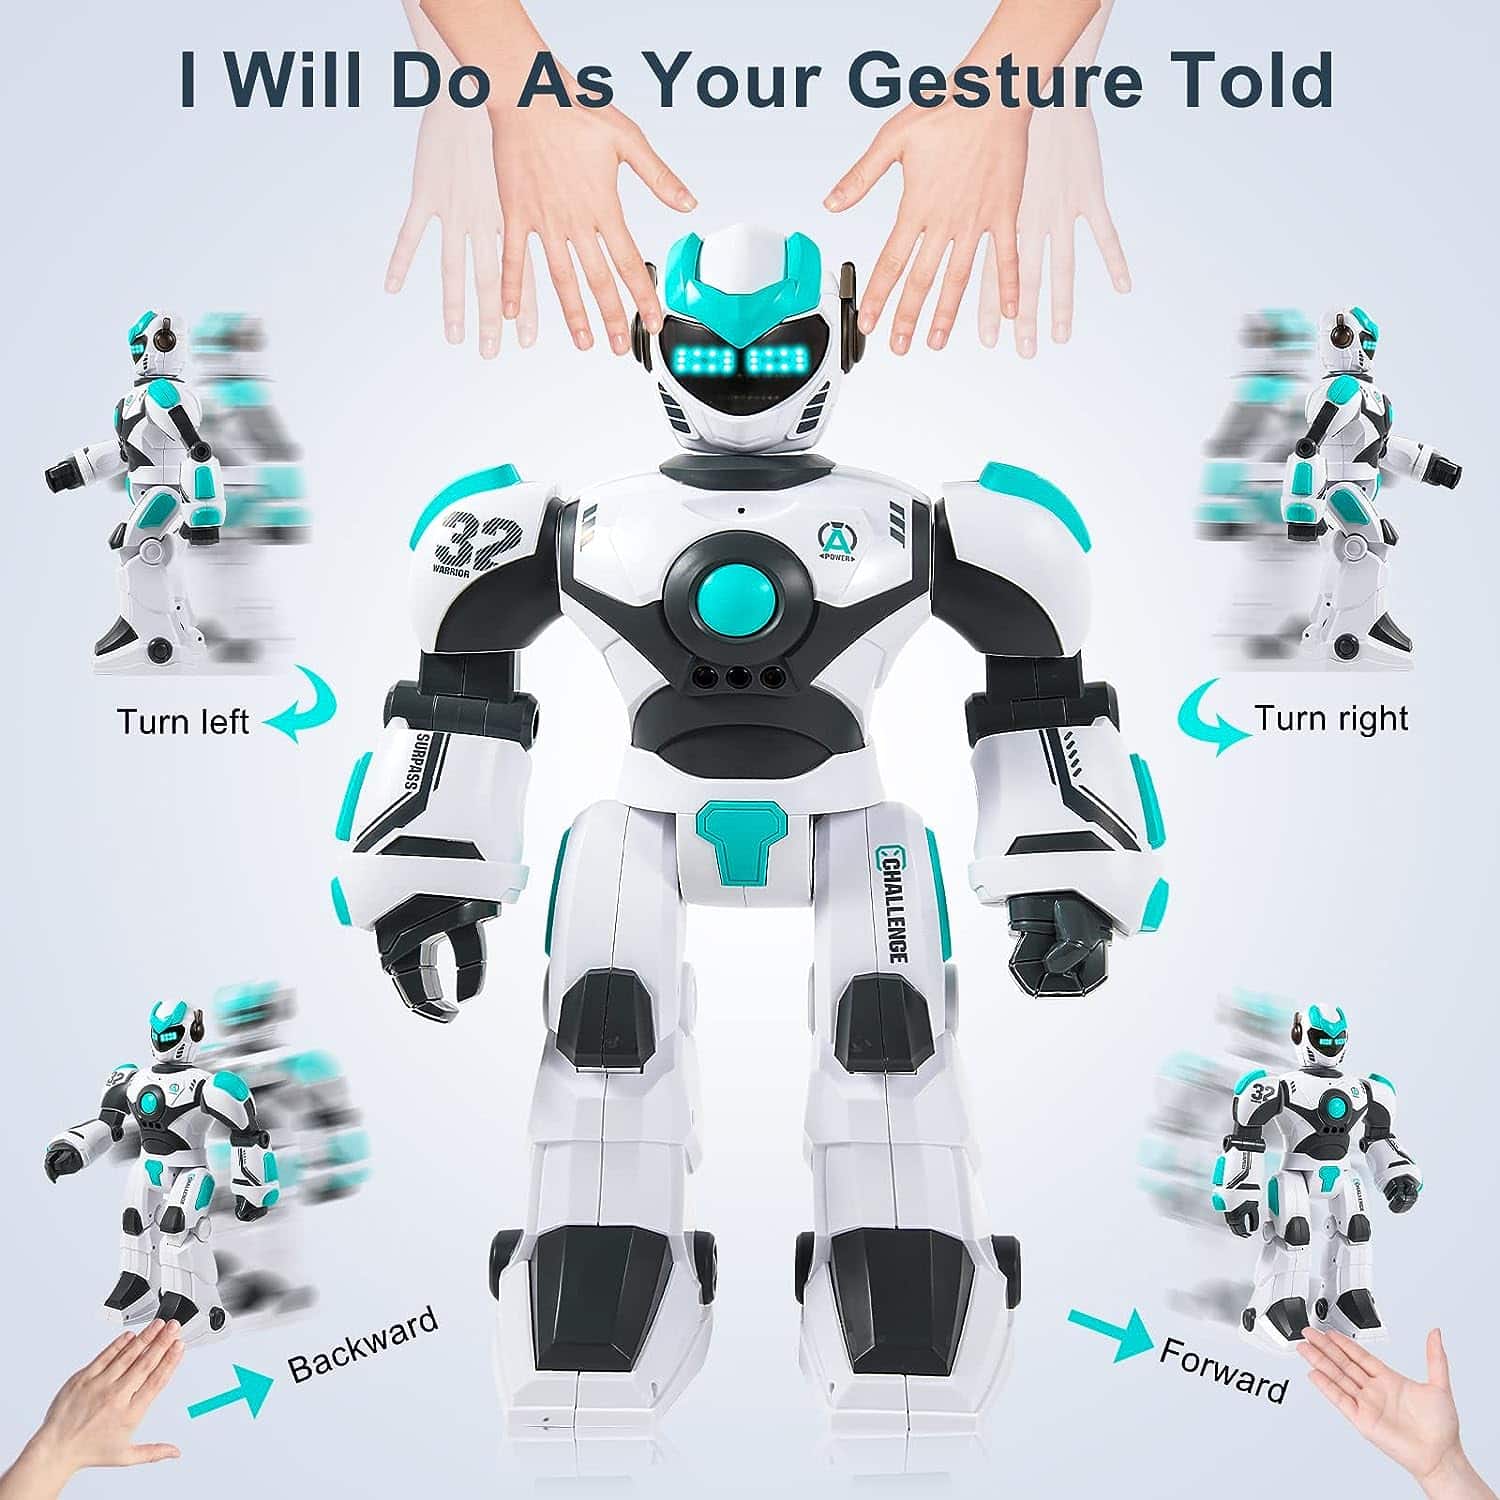 HPROMOT RC Robot Toy Review: The Perfect Gift for Kids of All Ages